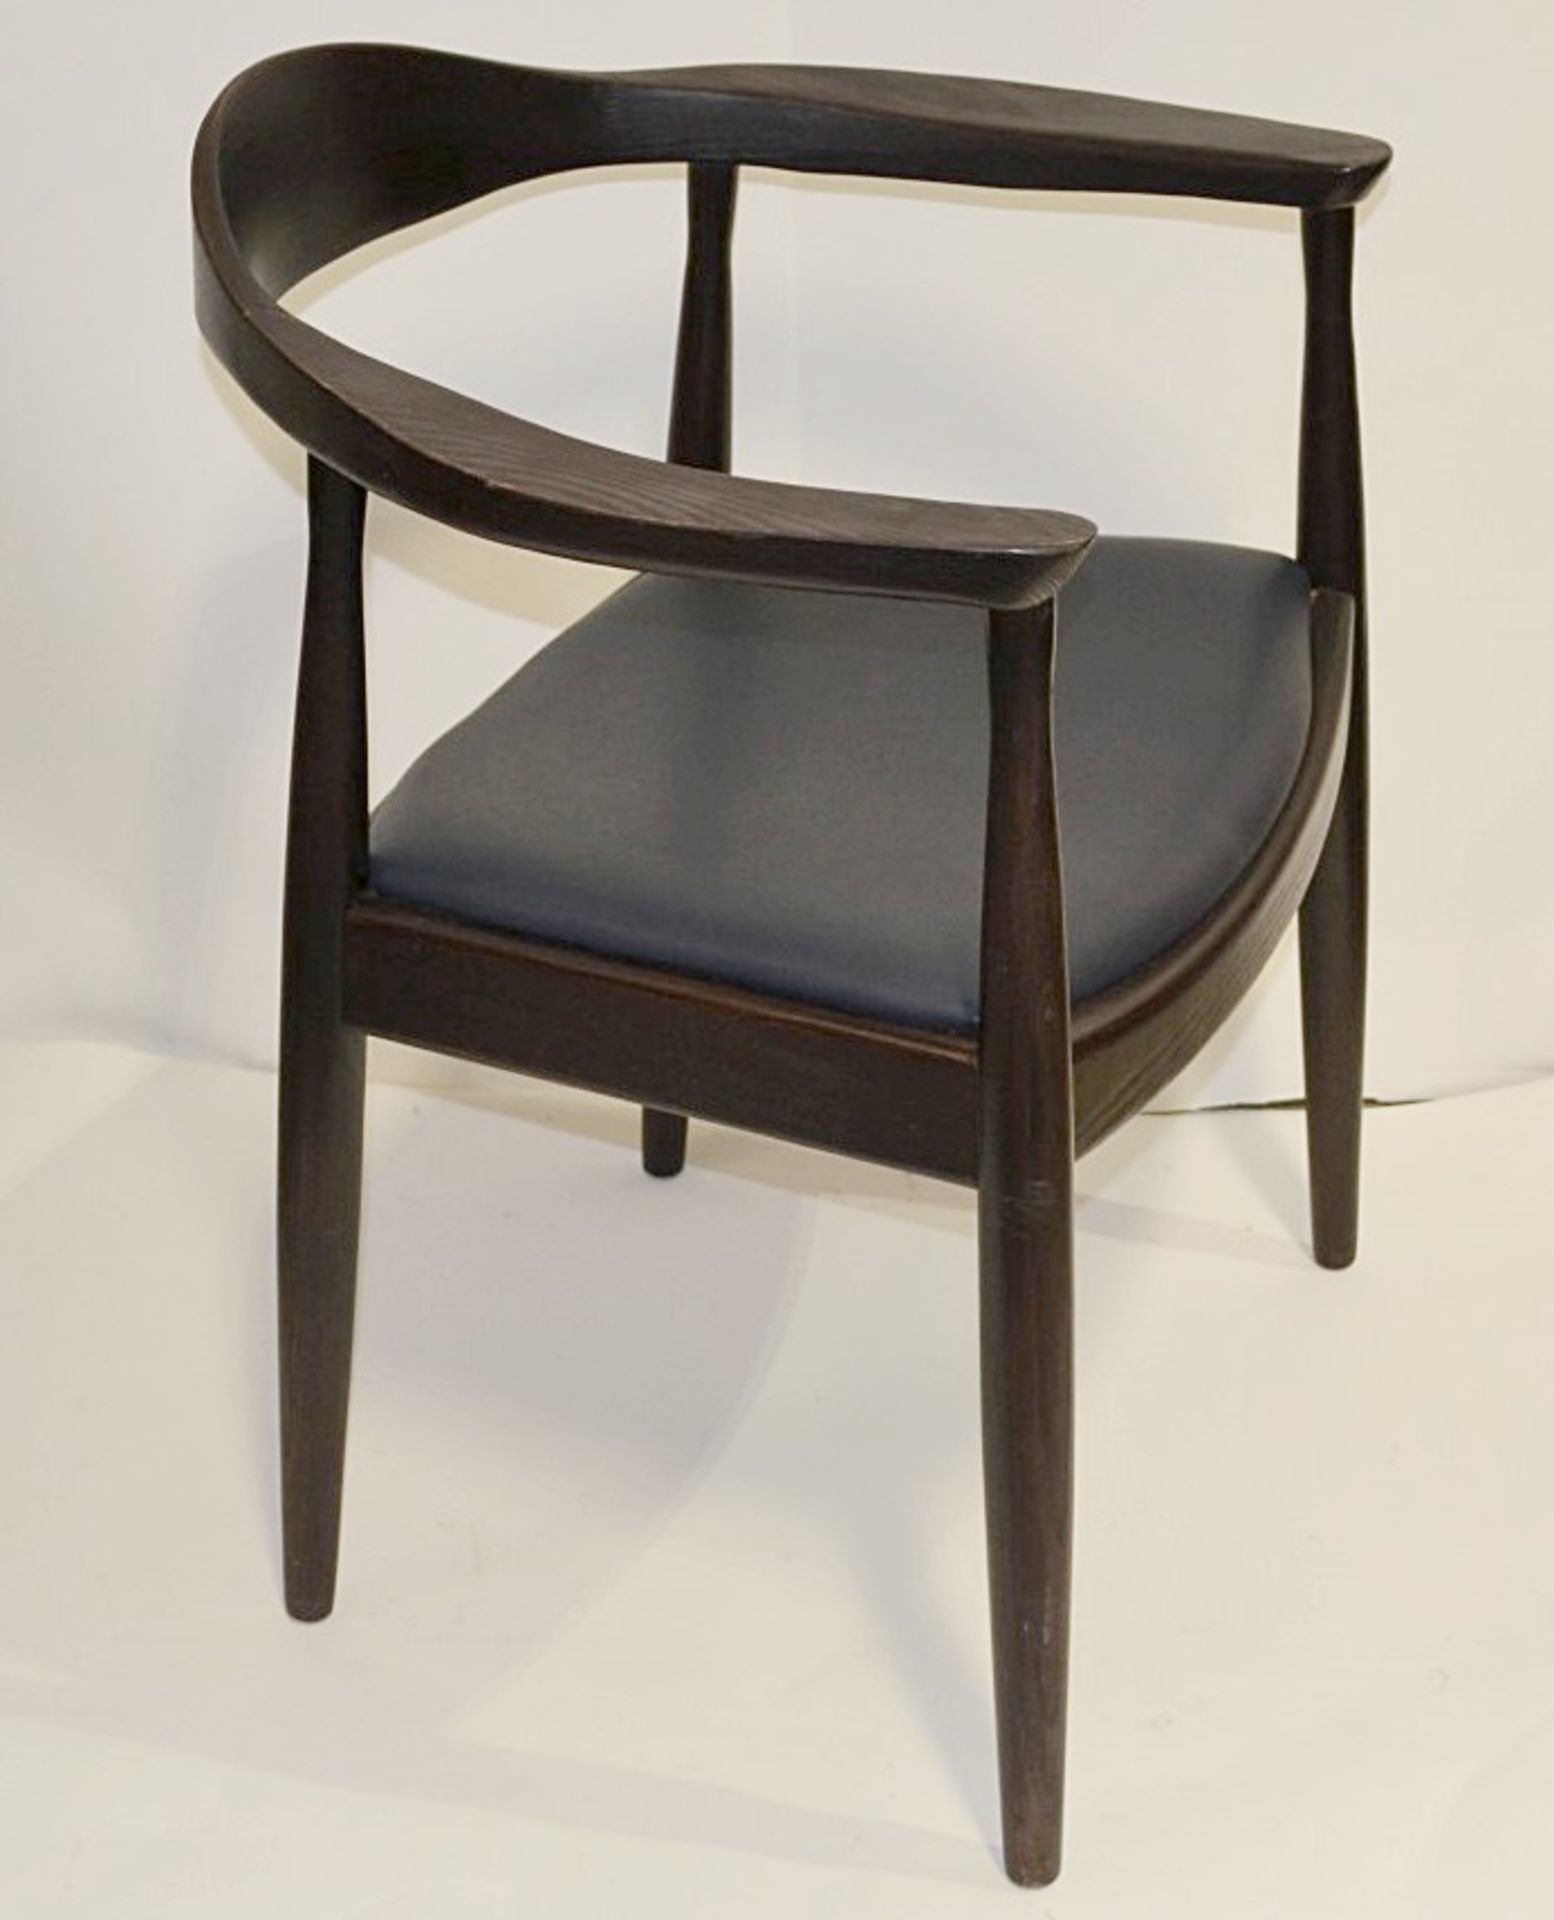 6 x Wooden Dining Chairs With Upholstered Seats - Dimensions: H78 x W64 x D57cm, Seat Height: 47cm - - Image 2 of 4